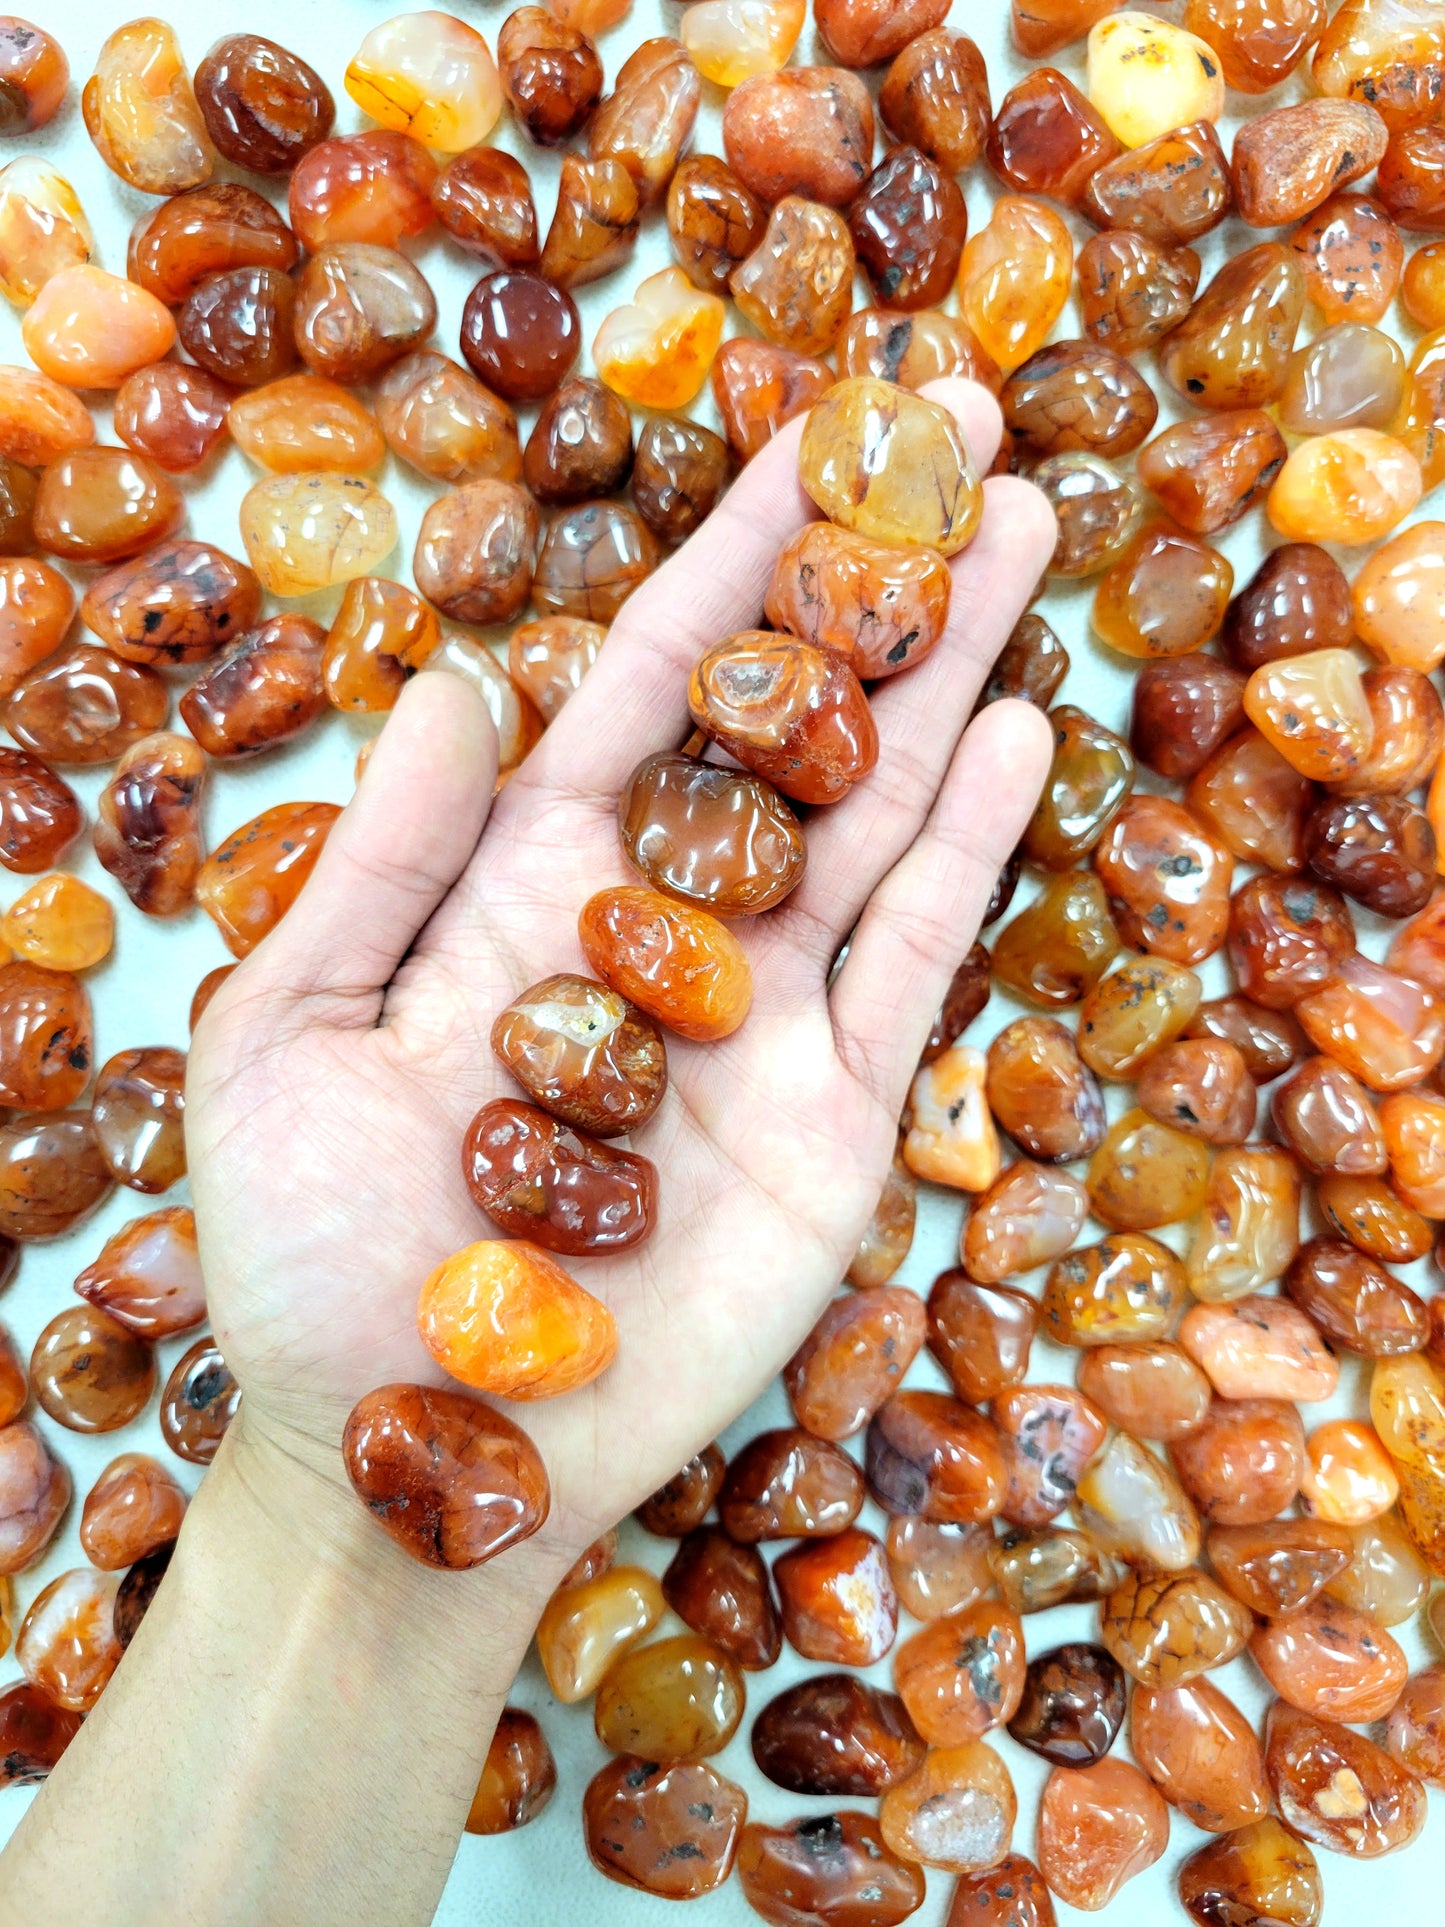 Tumbled Carnelian Crystals - Size SMALL 1/2 inch to 1 inch